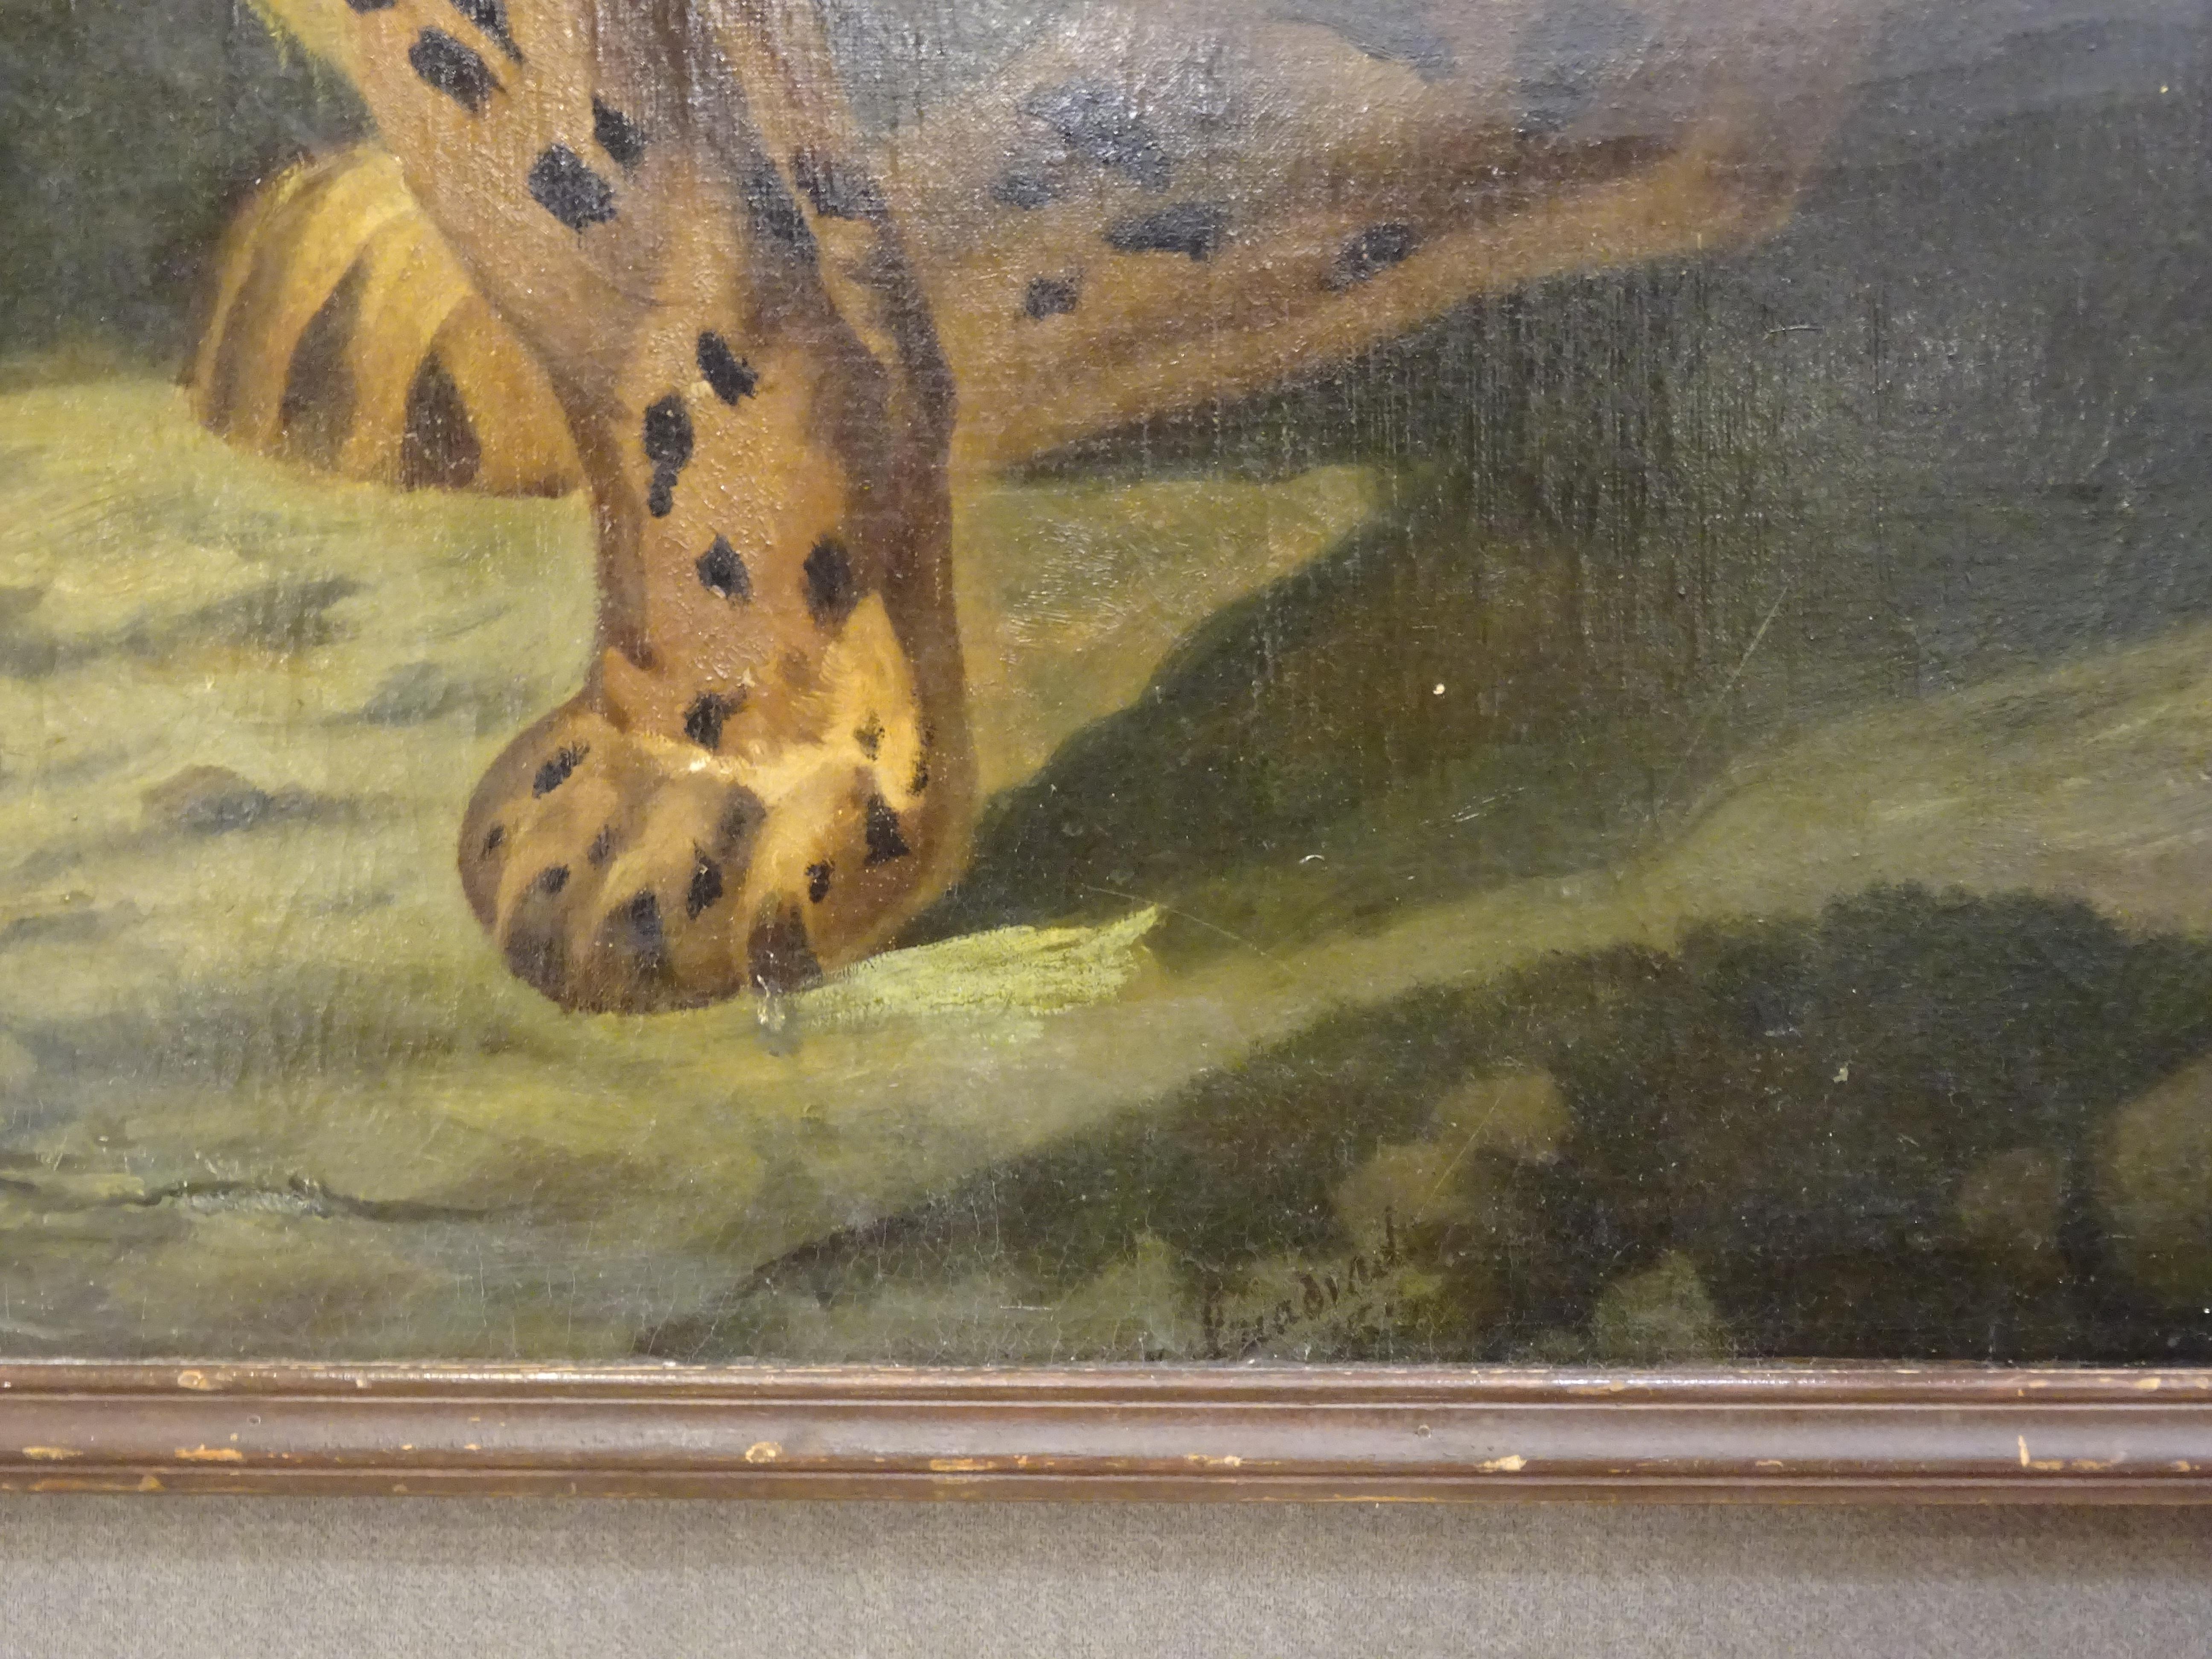 Oil on French canvas, Leopard S.XIX.

One of a Kind pictorial work of French origin belonging to the 19th century. He belongs to the French naturalist school, specializing in the creation of works of great realistic character. The painting